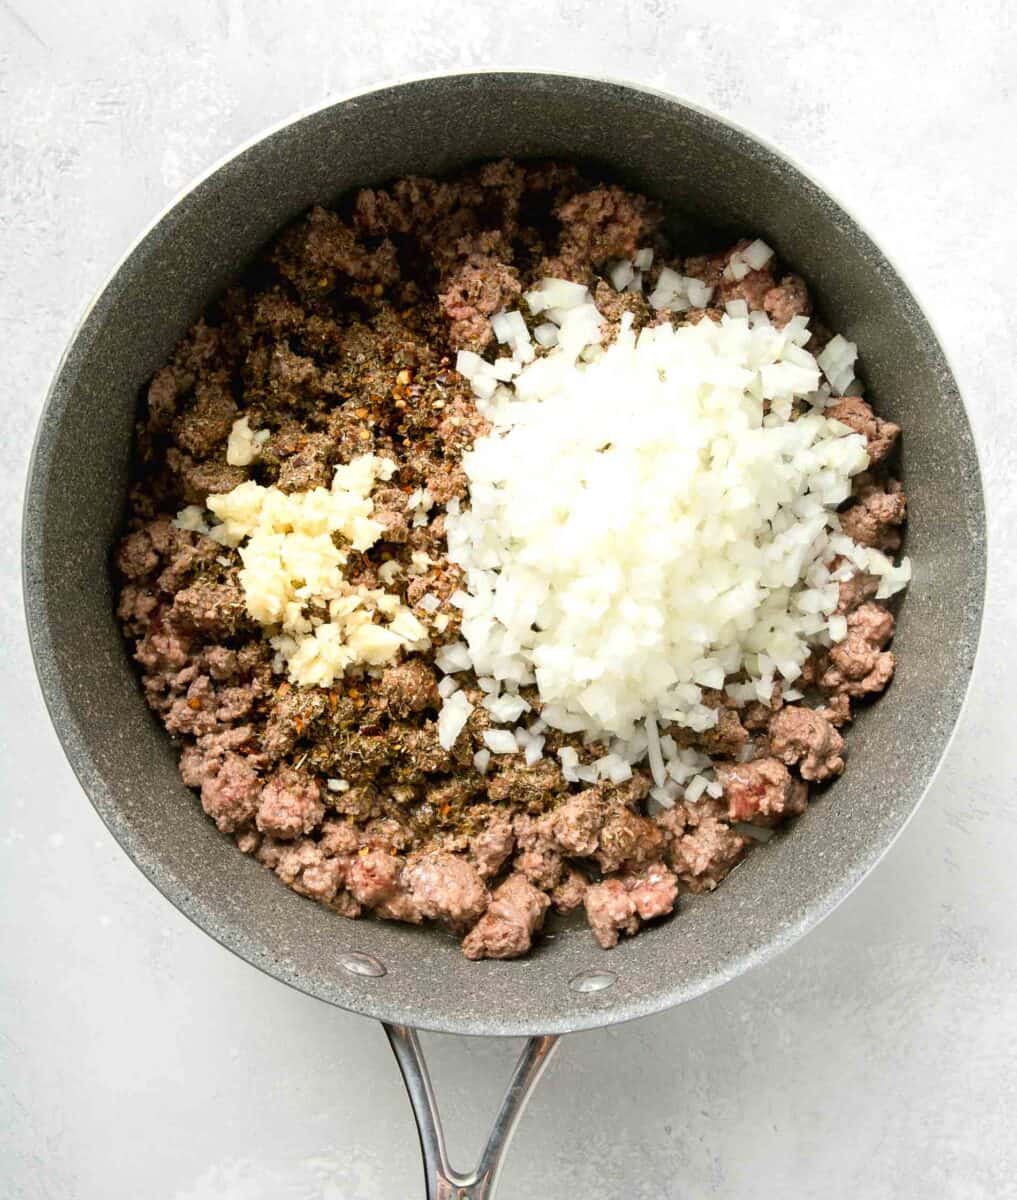 onions, garlic, and seasonings added to the cook ground beef in nonstick skillet